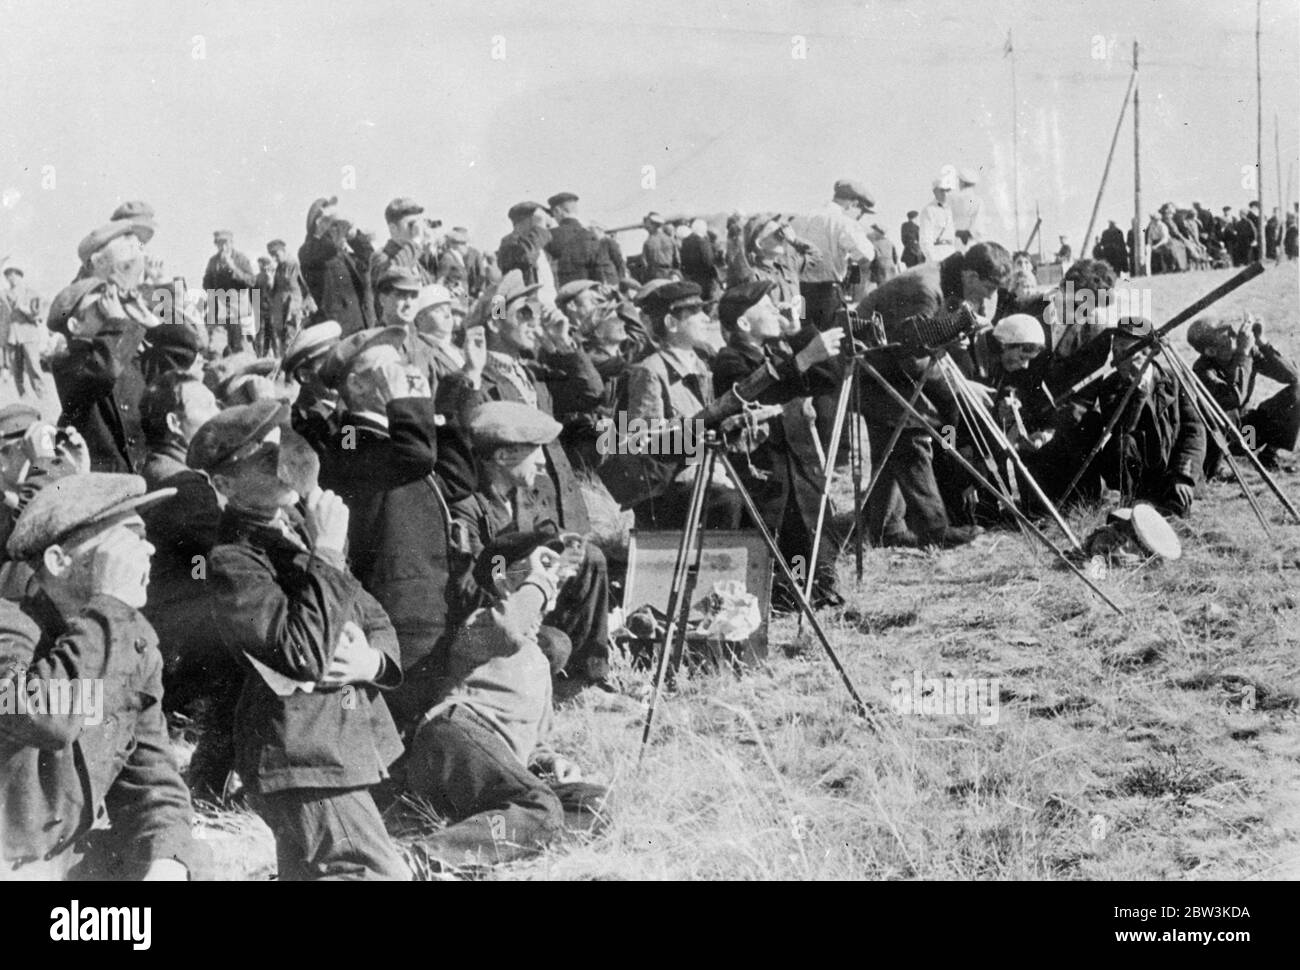 Amateur Astronomers Observe Solar Eclipse At Ak - Bulak Working almost side by side with scientists from Harvard University ( USA ) and Pulkovo Observatory ( Leningrad ) hundreds of amateur astronomers had a perfect view of the total eclipse of the sun from Ak - Bulak on the Kazakhstan border USSR . Photo shows: Amateurs observing the eclipse with telescopes , cameras and smoked glass at Ak - Bulak 22 Jun 1936 Stock Photo